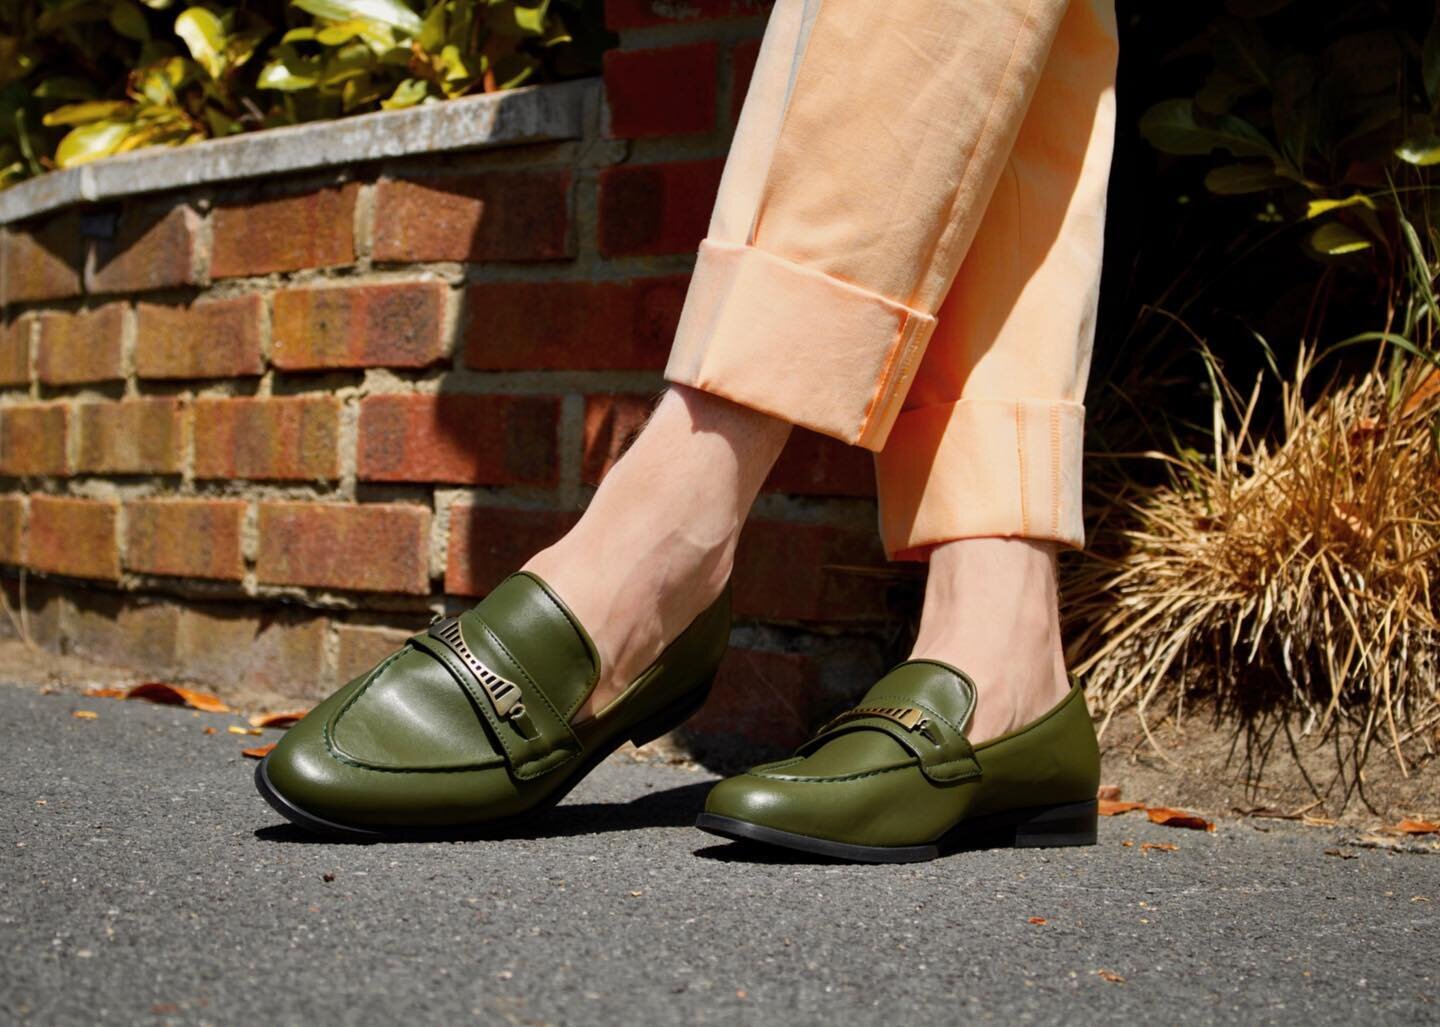 Explore summer comfort with our British made cactus leather loafers with unique breathability and moisture control. 

.
.
.
.
.
.
.
.
.
.
.
#sustainablefashion #pennyloafers #FootwearFashion #loafershoes #loafers #madeinbritain #handcrafted #cactusle